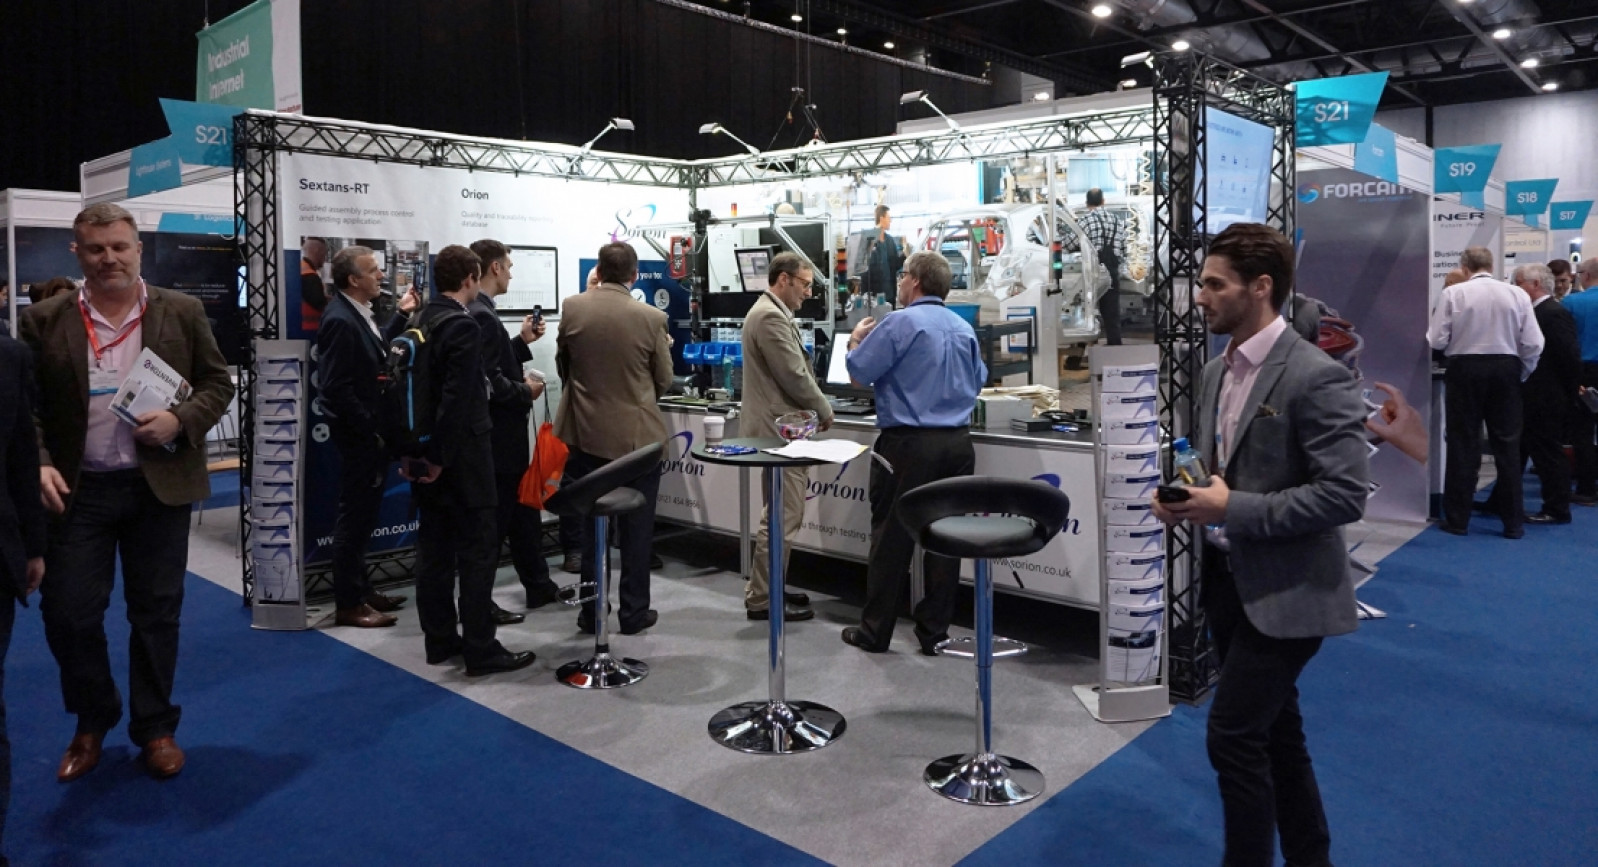 Sorion Electronics Enjoys Success at Industry Exhi...